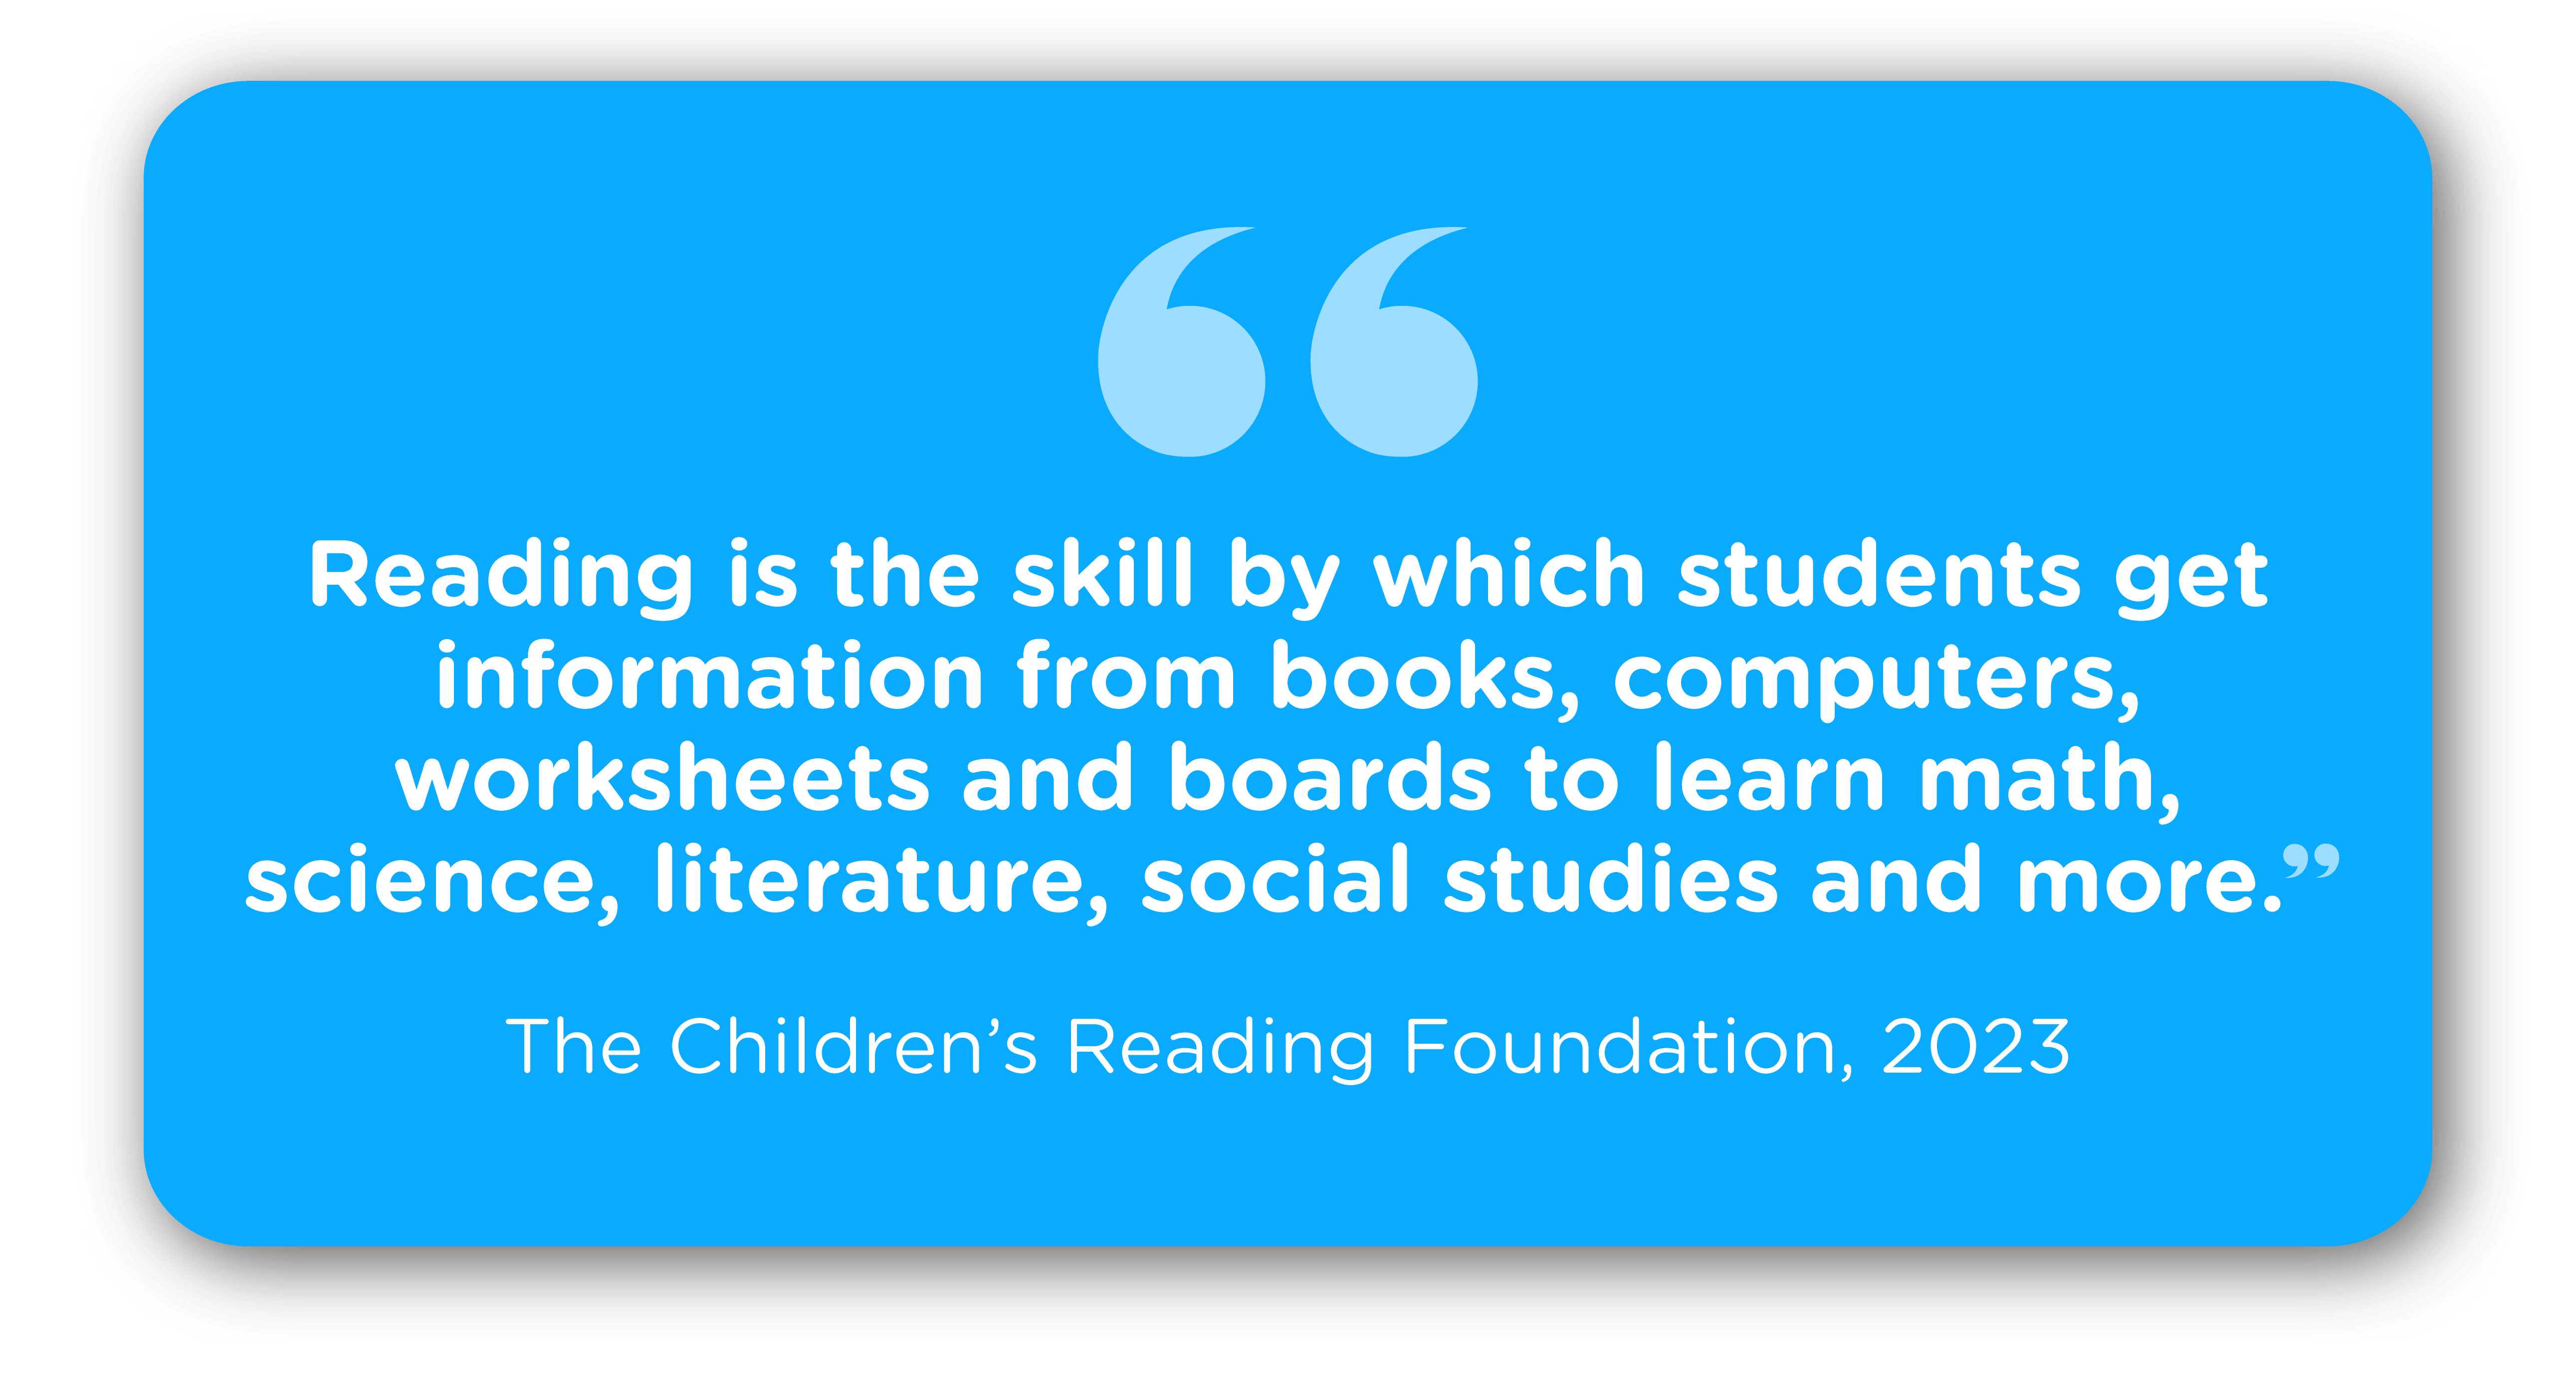 “Reading is the skill by which students get information from books, computers, worksheets and boards to learn math, science, literature, social studies and more” (The Children’s Reading Foundation, 2023).